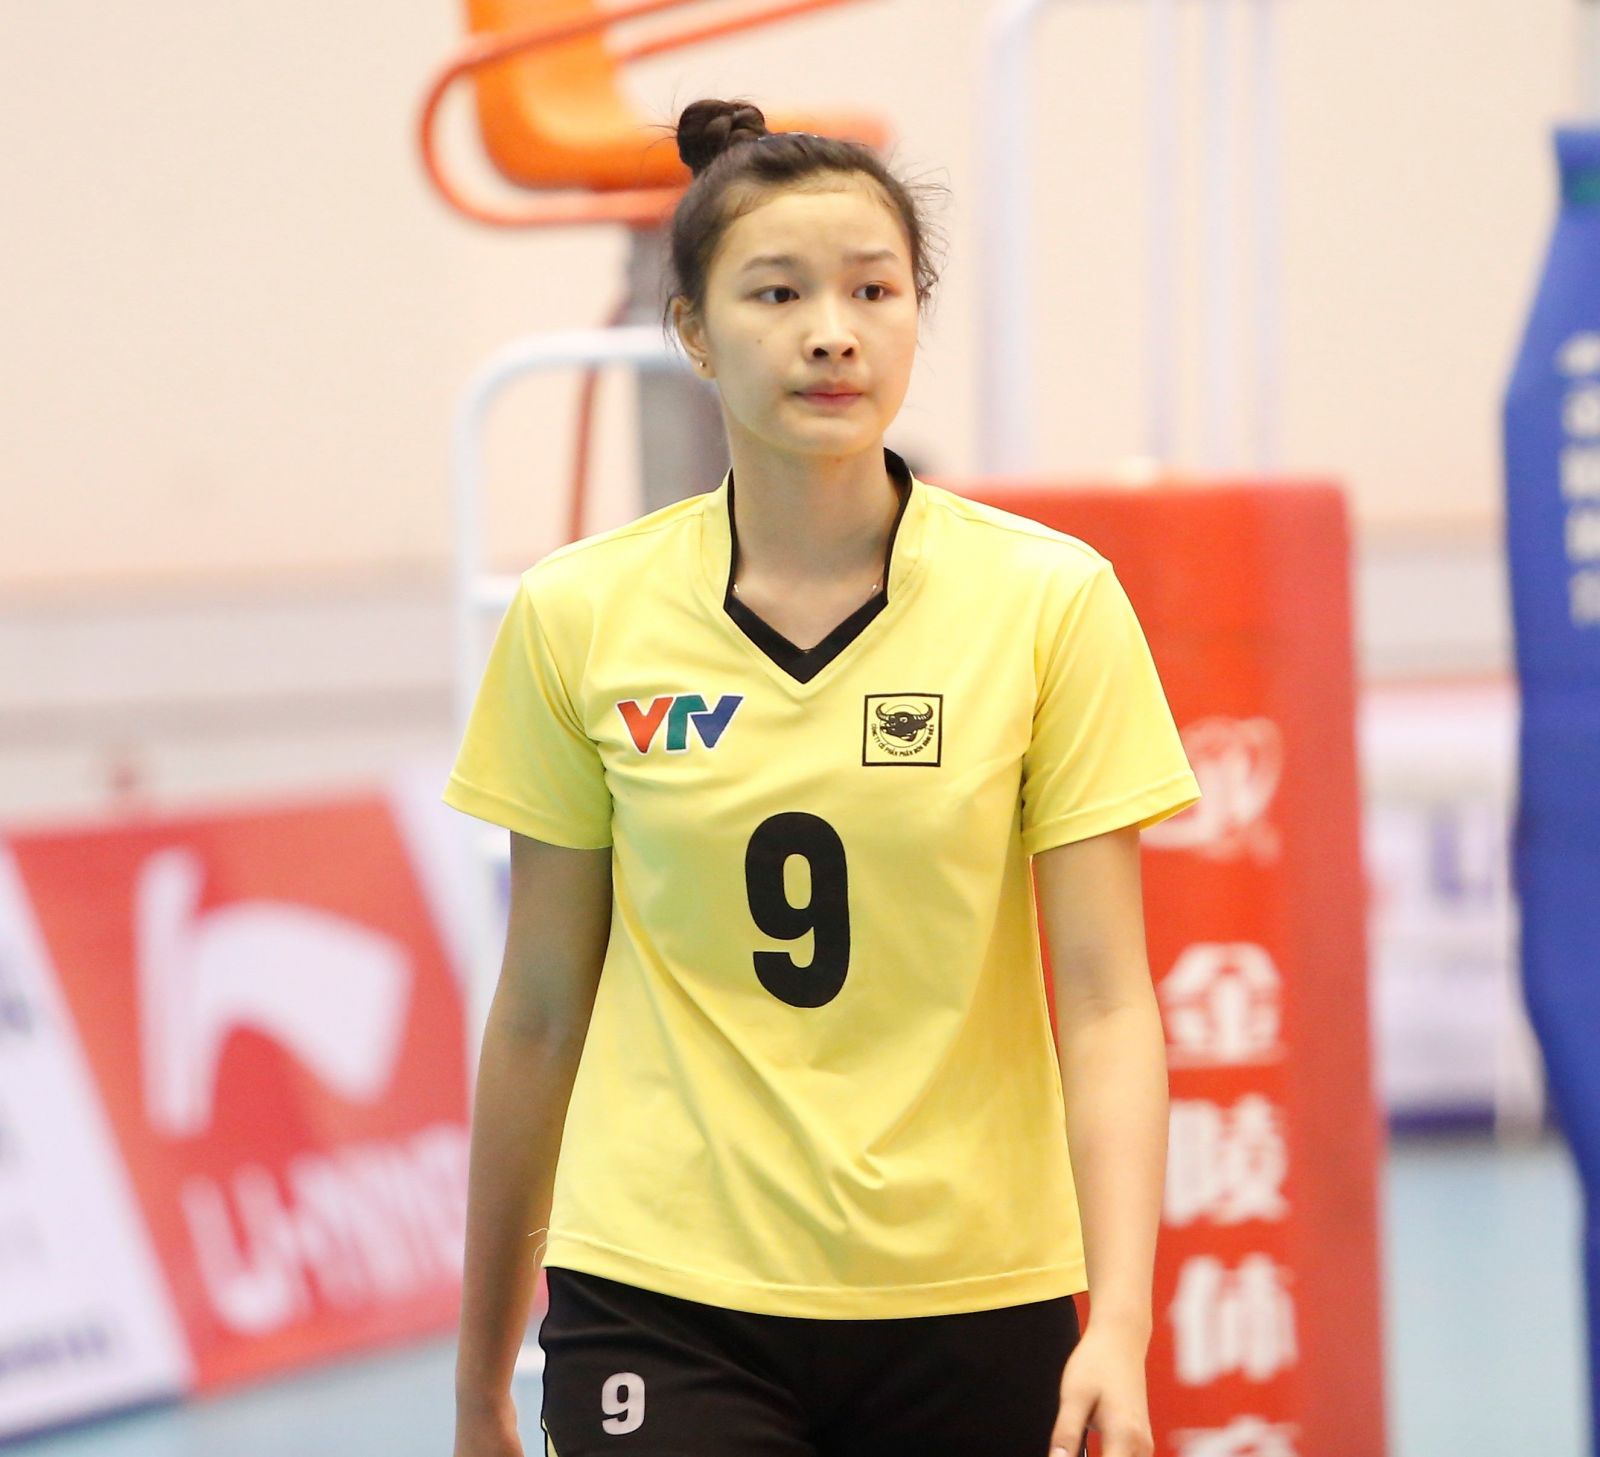  A new image of volleyball player Dang Thi Kim Thanh